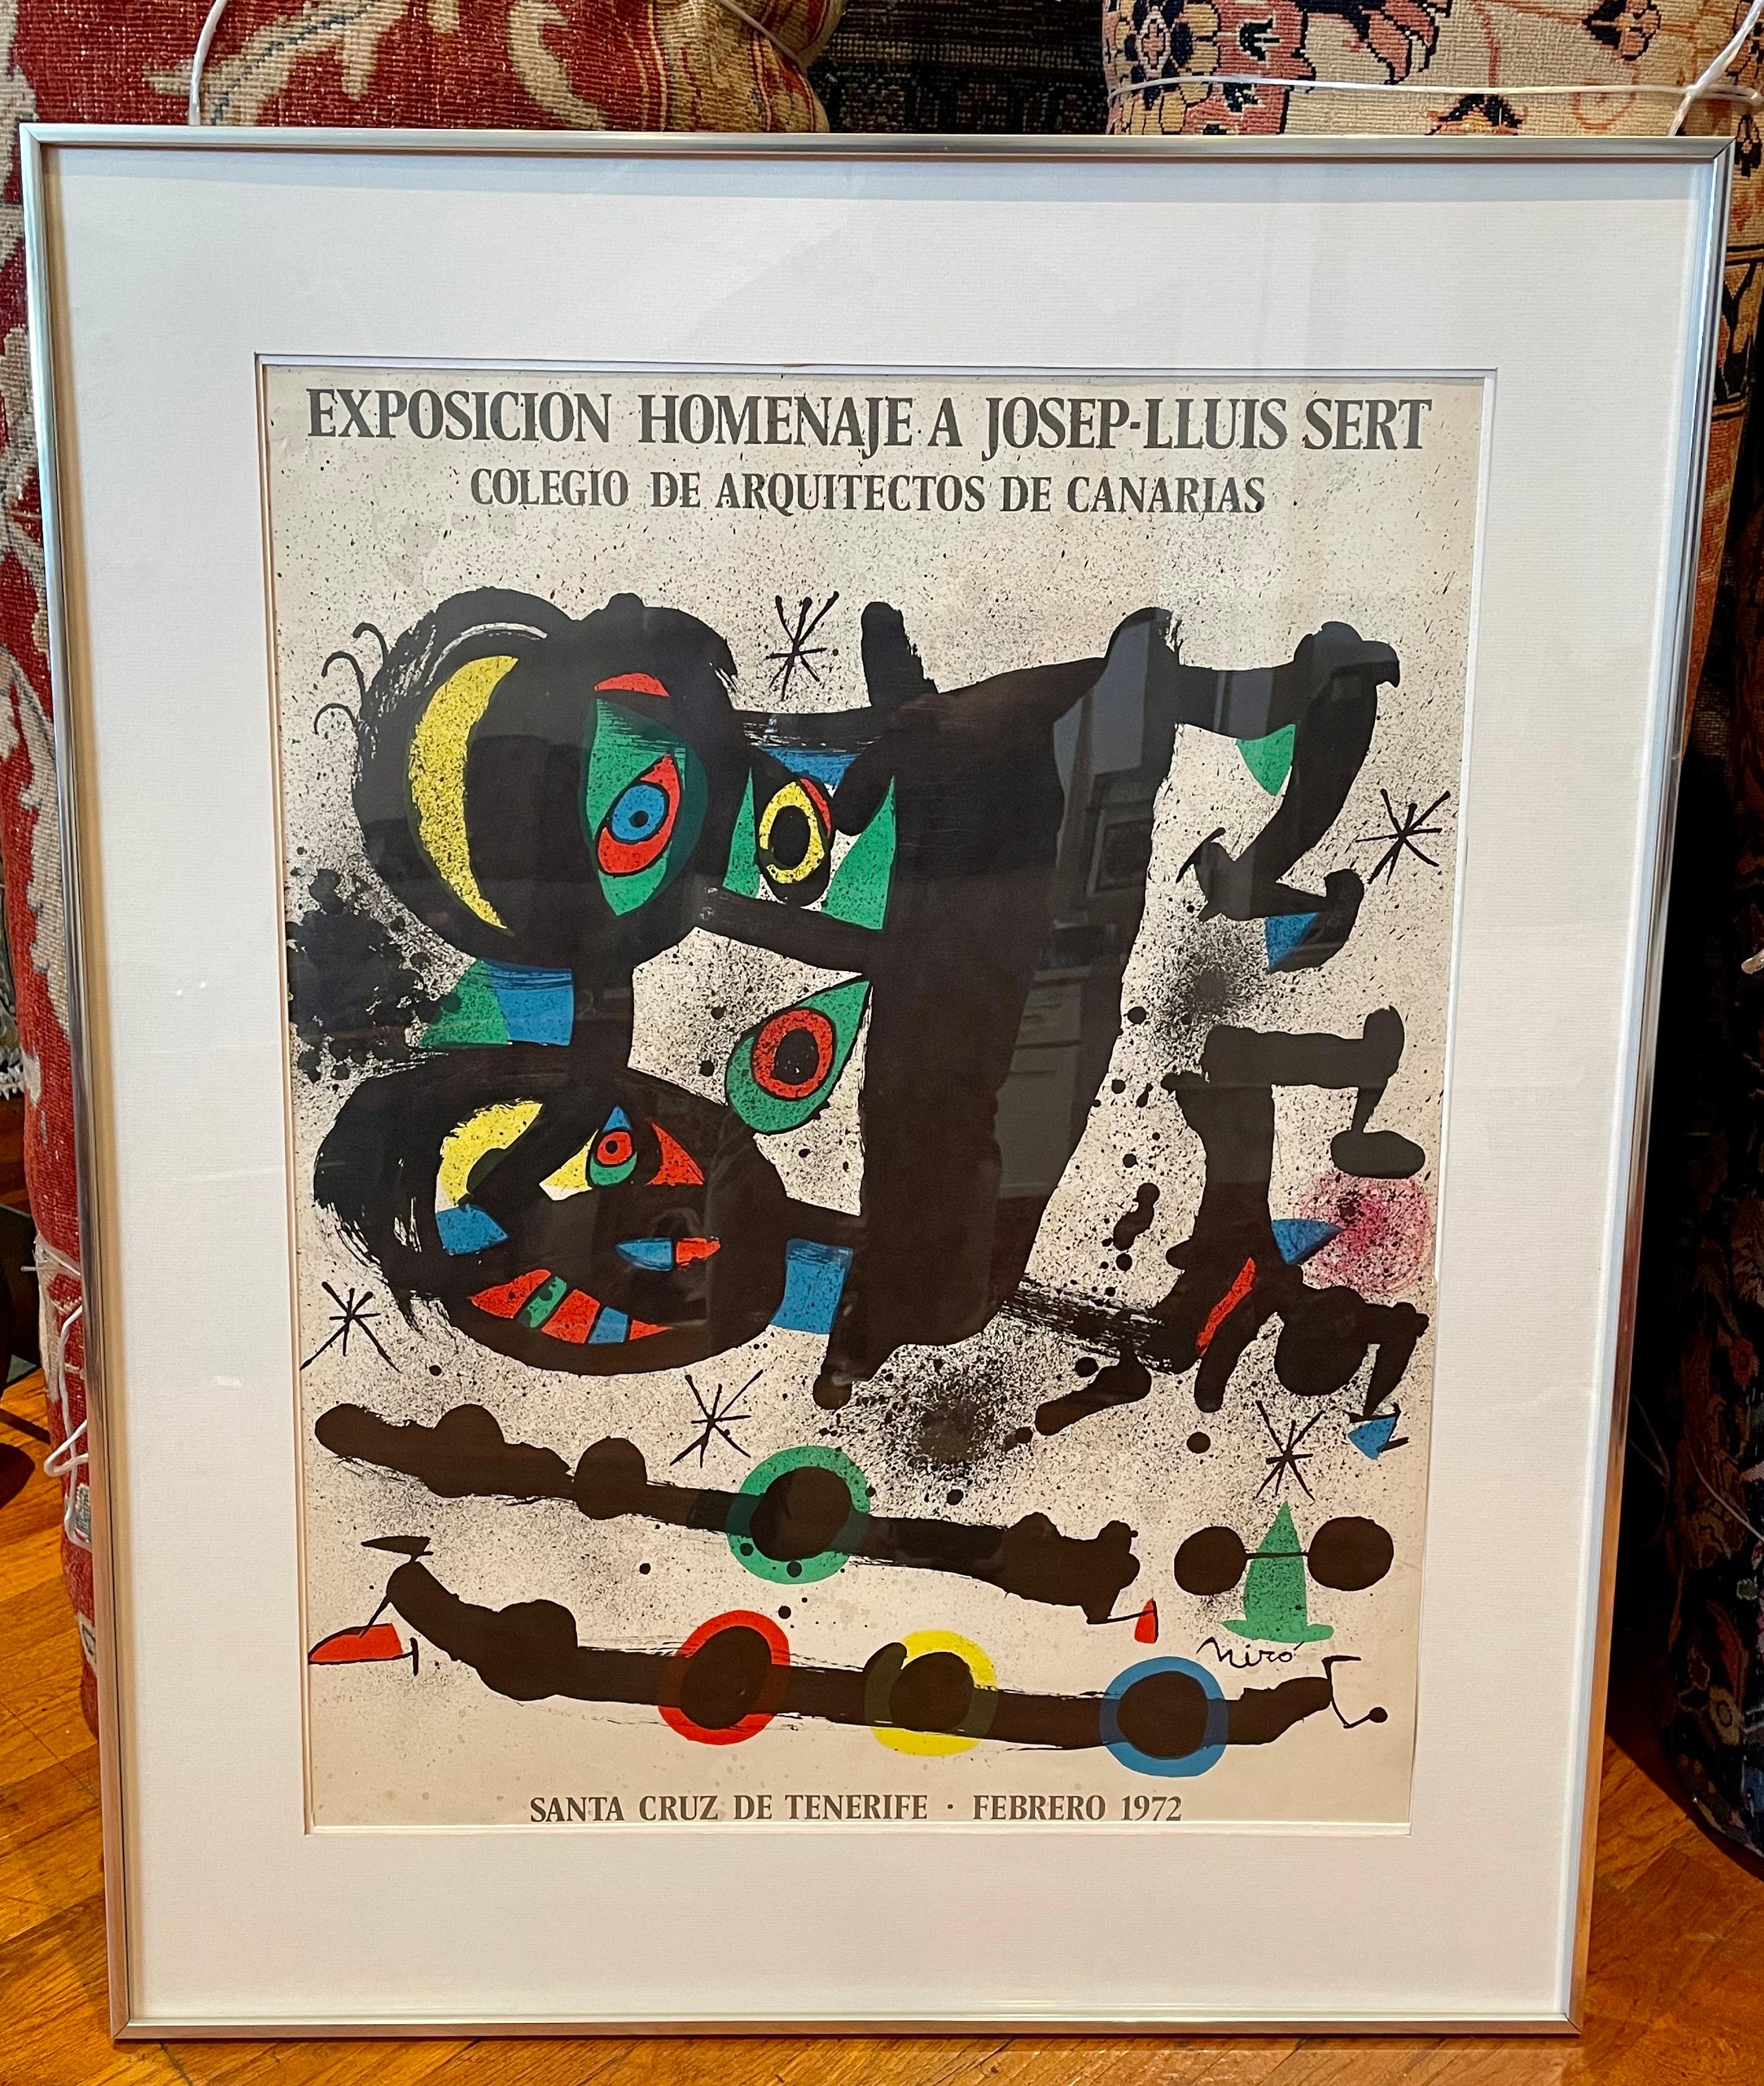 Spanish Rare 1972 Joan Miro Original Abstract Exposition Poster from Canarias Spain